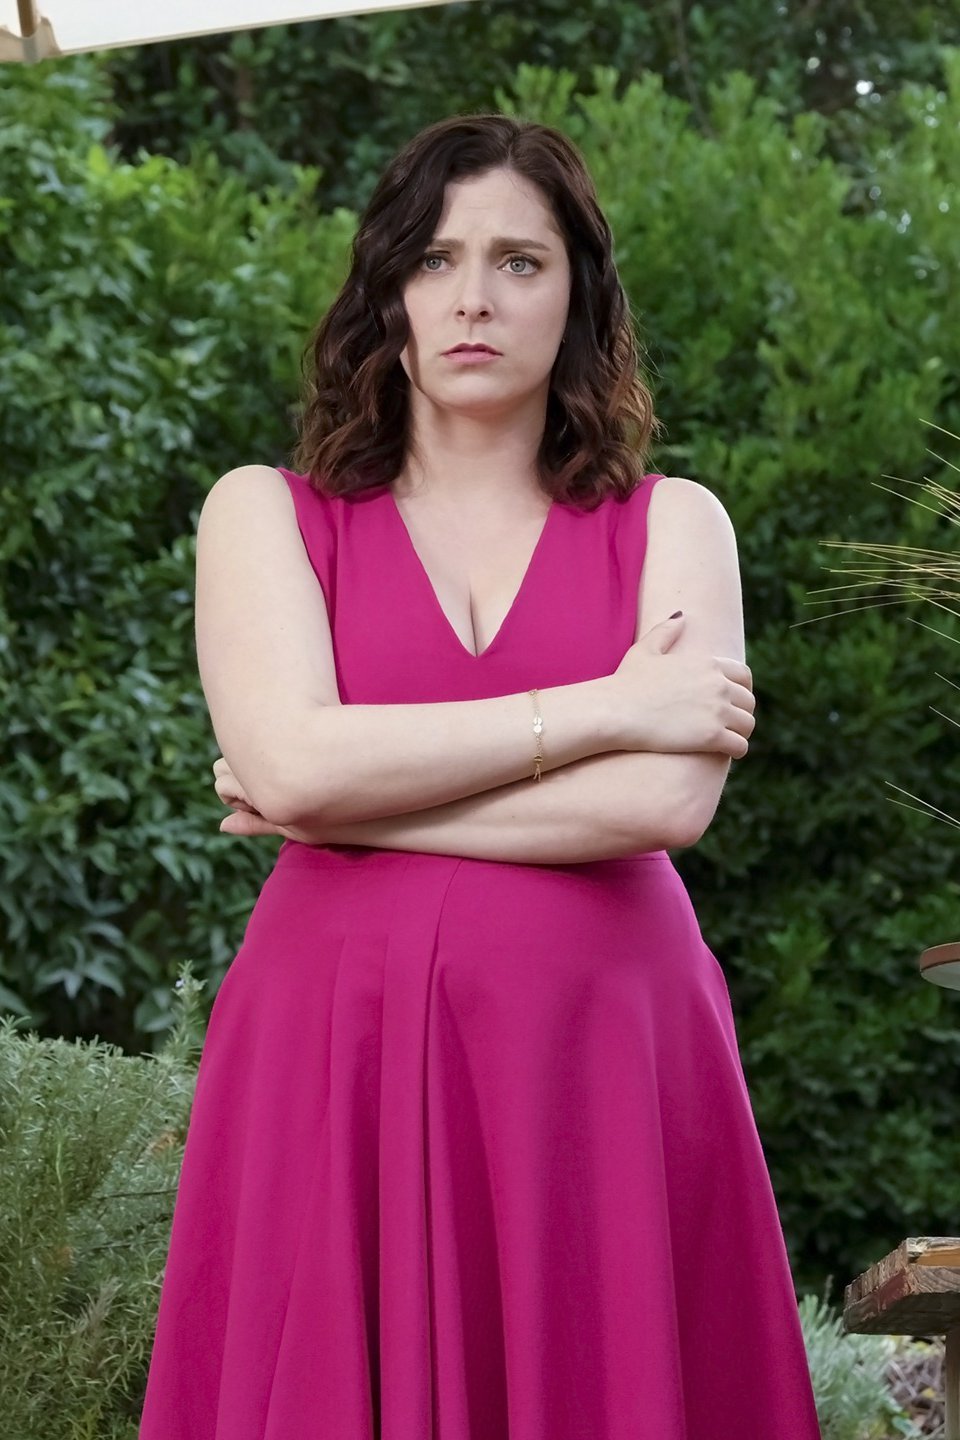 Nathaniel and I Are Just Friends! Crazy Ex Girlfriend S3E11 Review